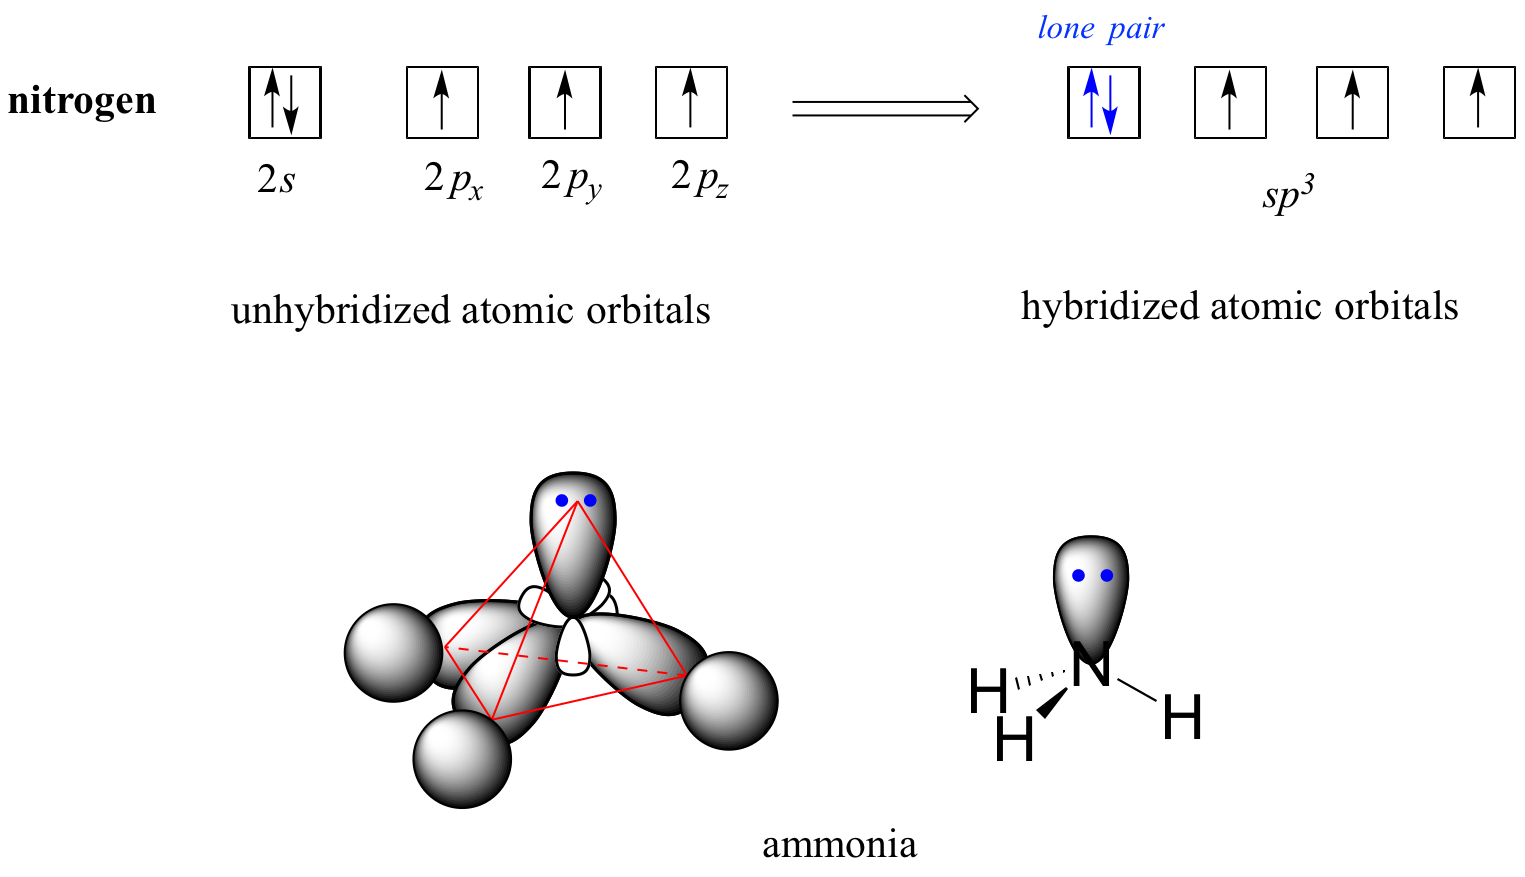 For ammonia, the nitrogen has a full 2 s orbitals and three unpaired electrons in the 2 p orbital. After hybridizing, the nitrogen has one lone pair and three unpaired electrons in the s p three orbital. 